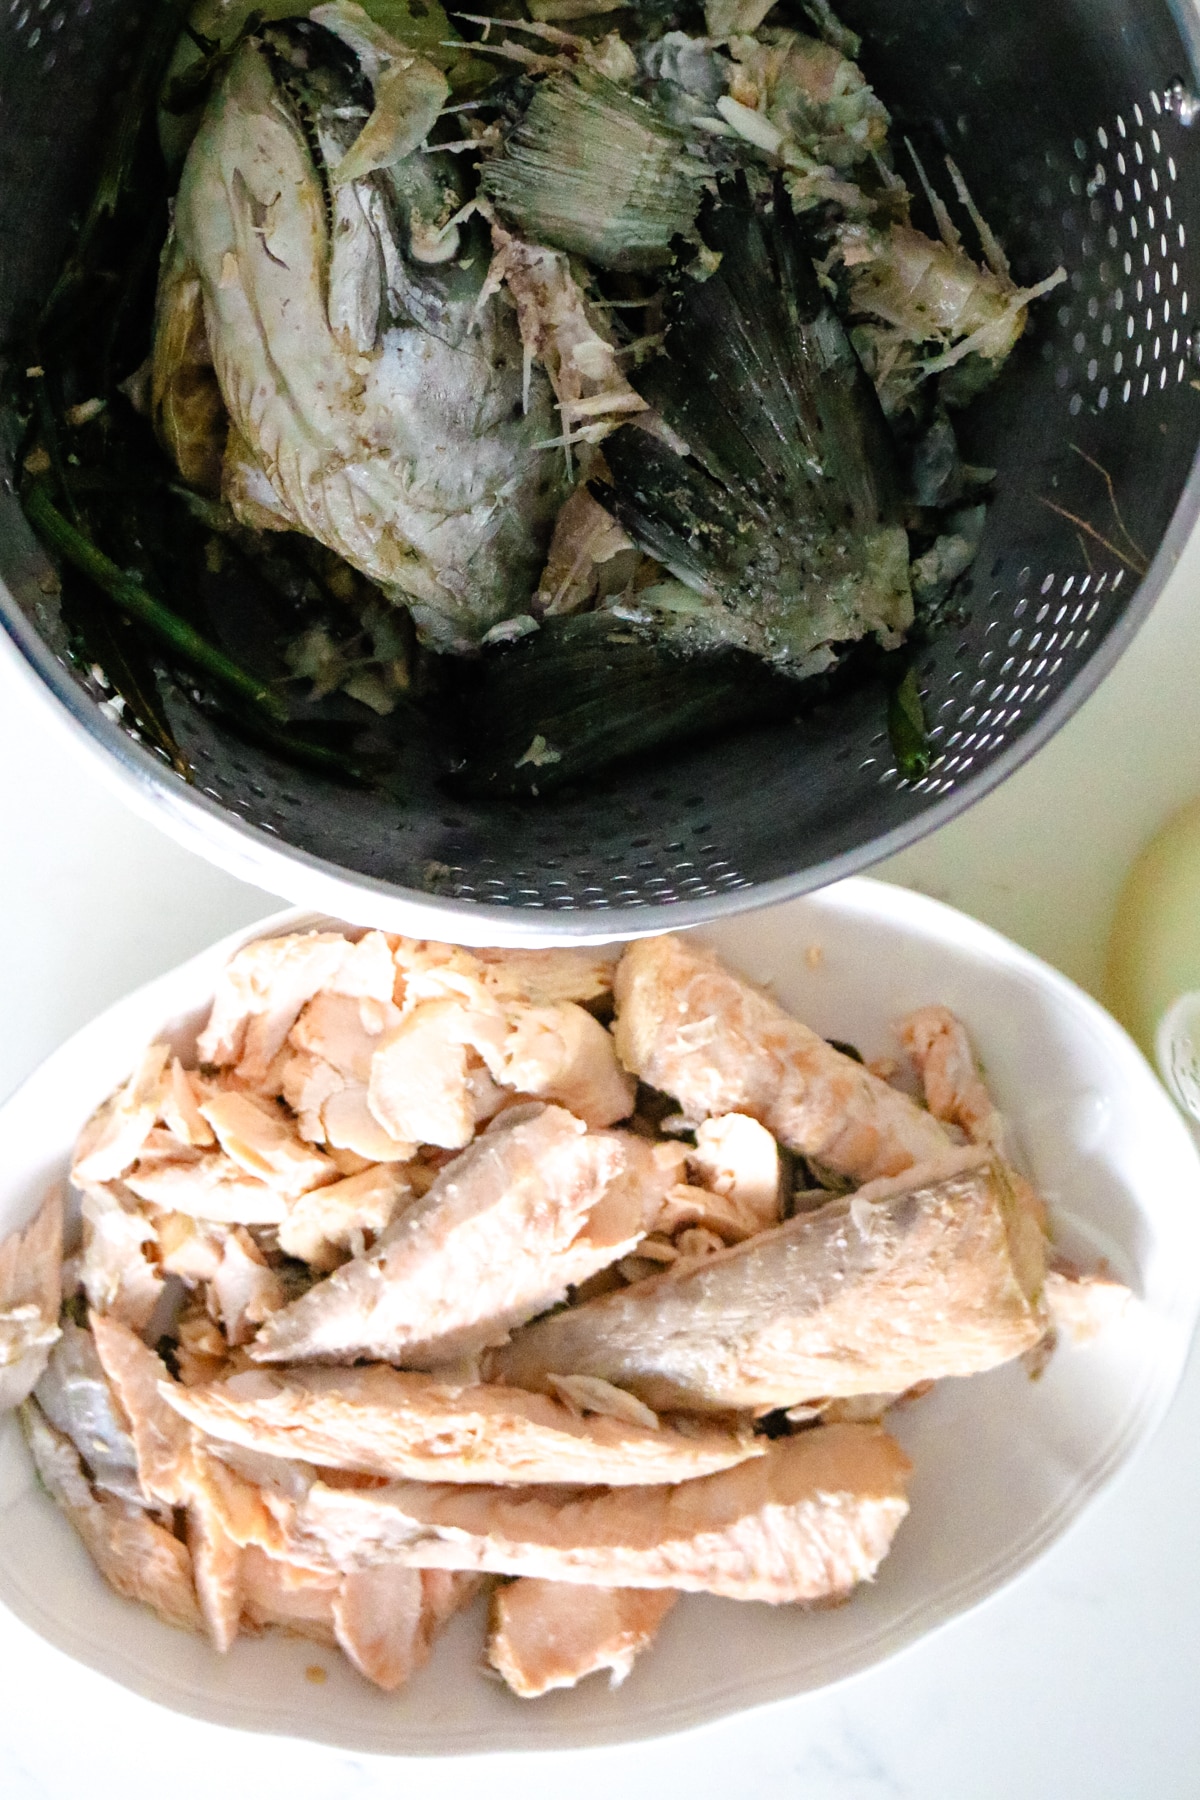 fish cleaned from bones in white bowl next to steal strainer filled with bones and skin